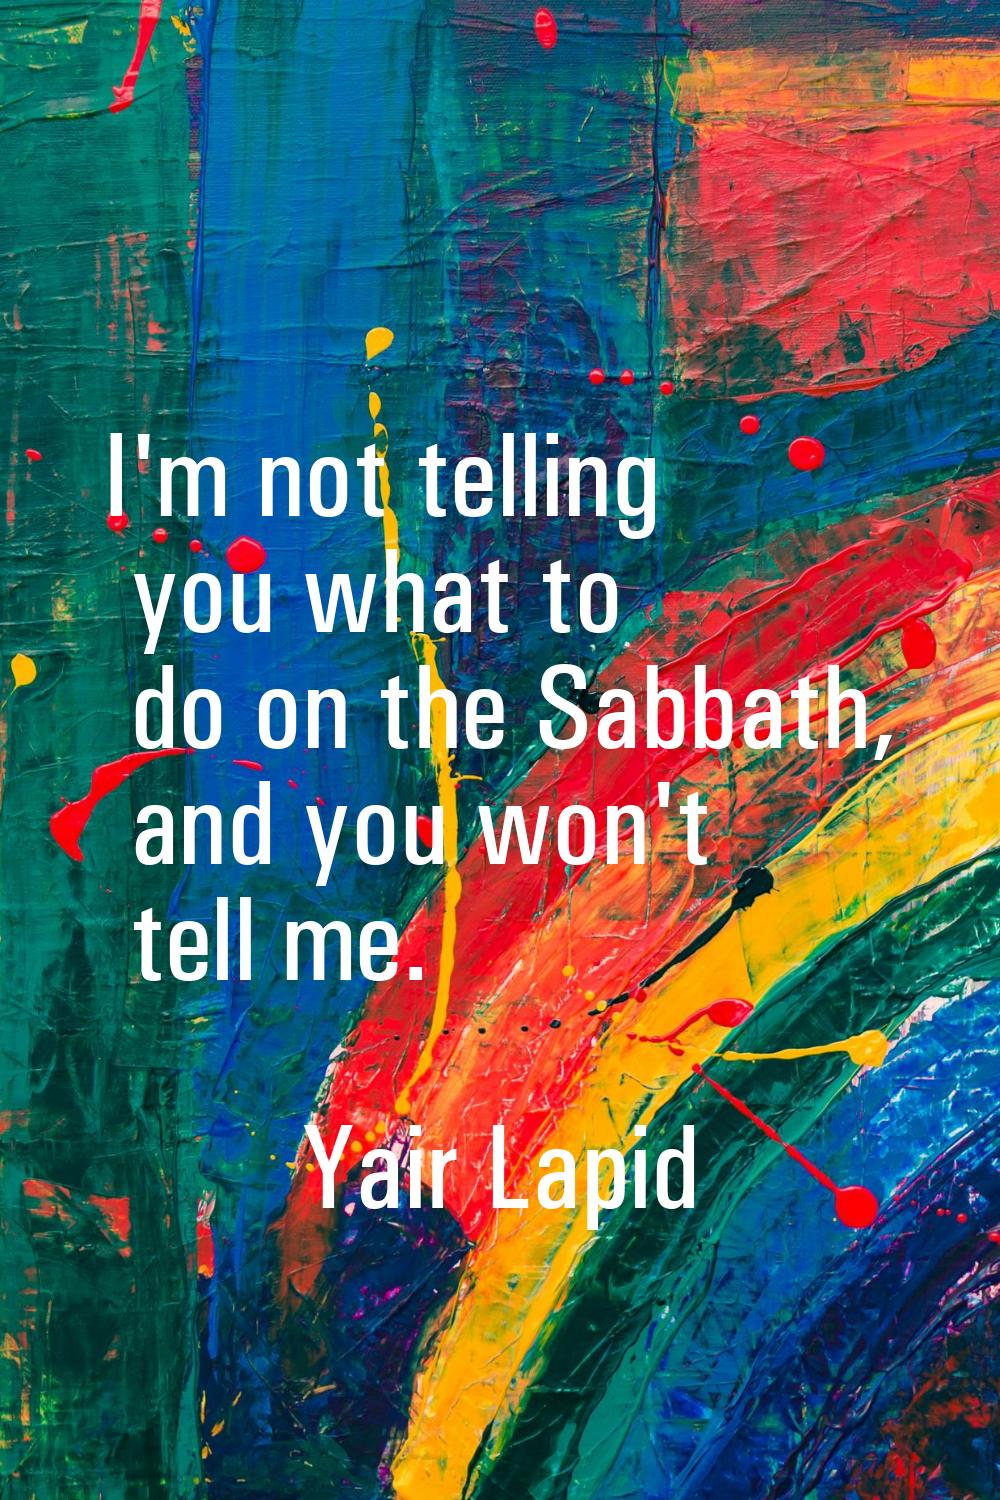 I'm not telling you what to do on the Sabbath, and you won't tell me.